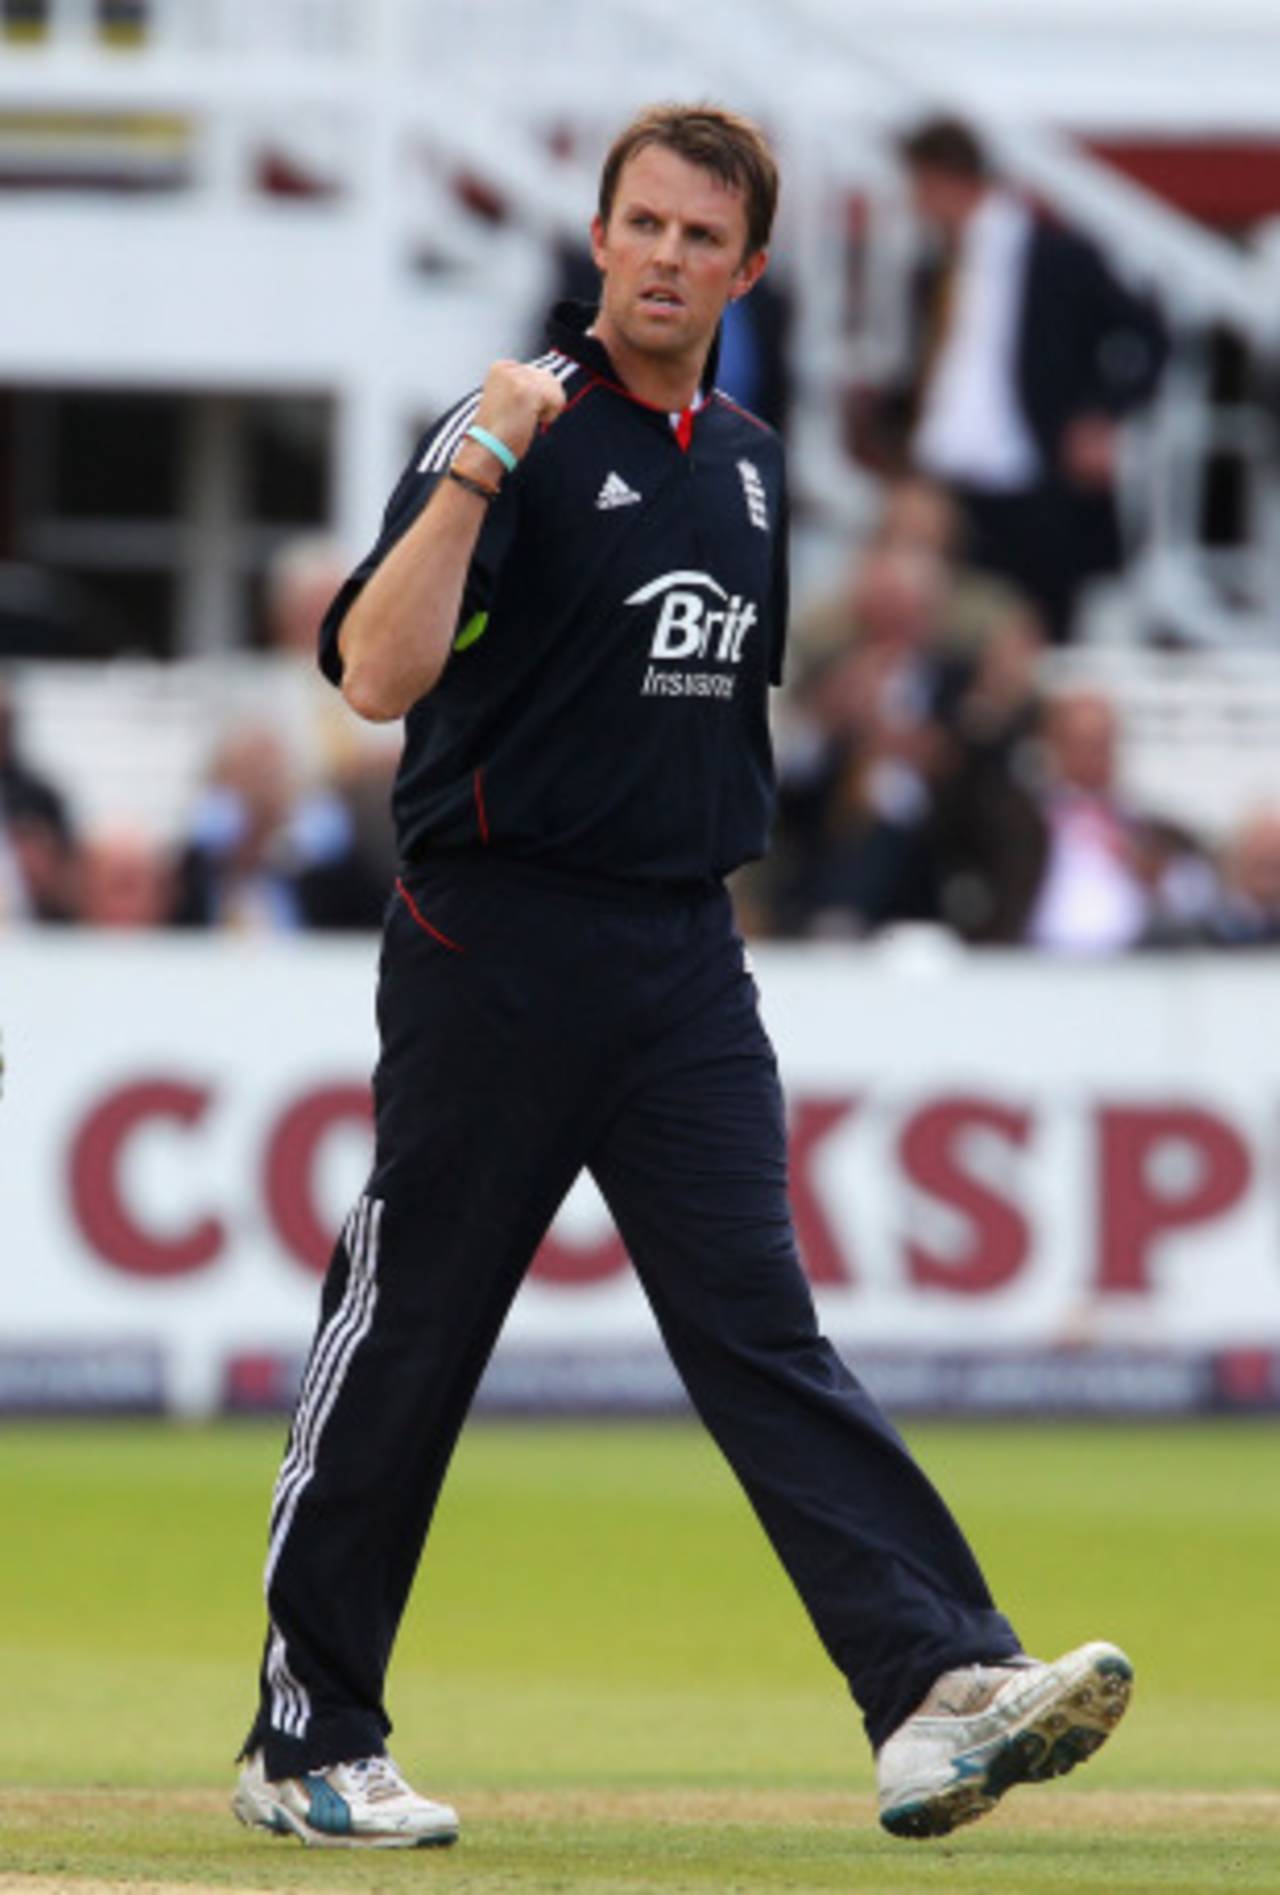 Graeme Swann claimed four wickets in another attacking ten-over spell, England v Pakistan, 4th ODI, Lord's, September 20, 2010